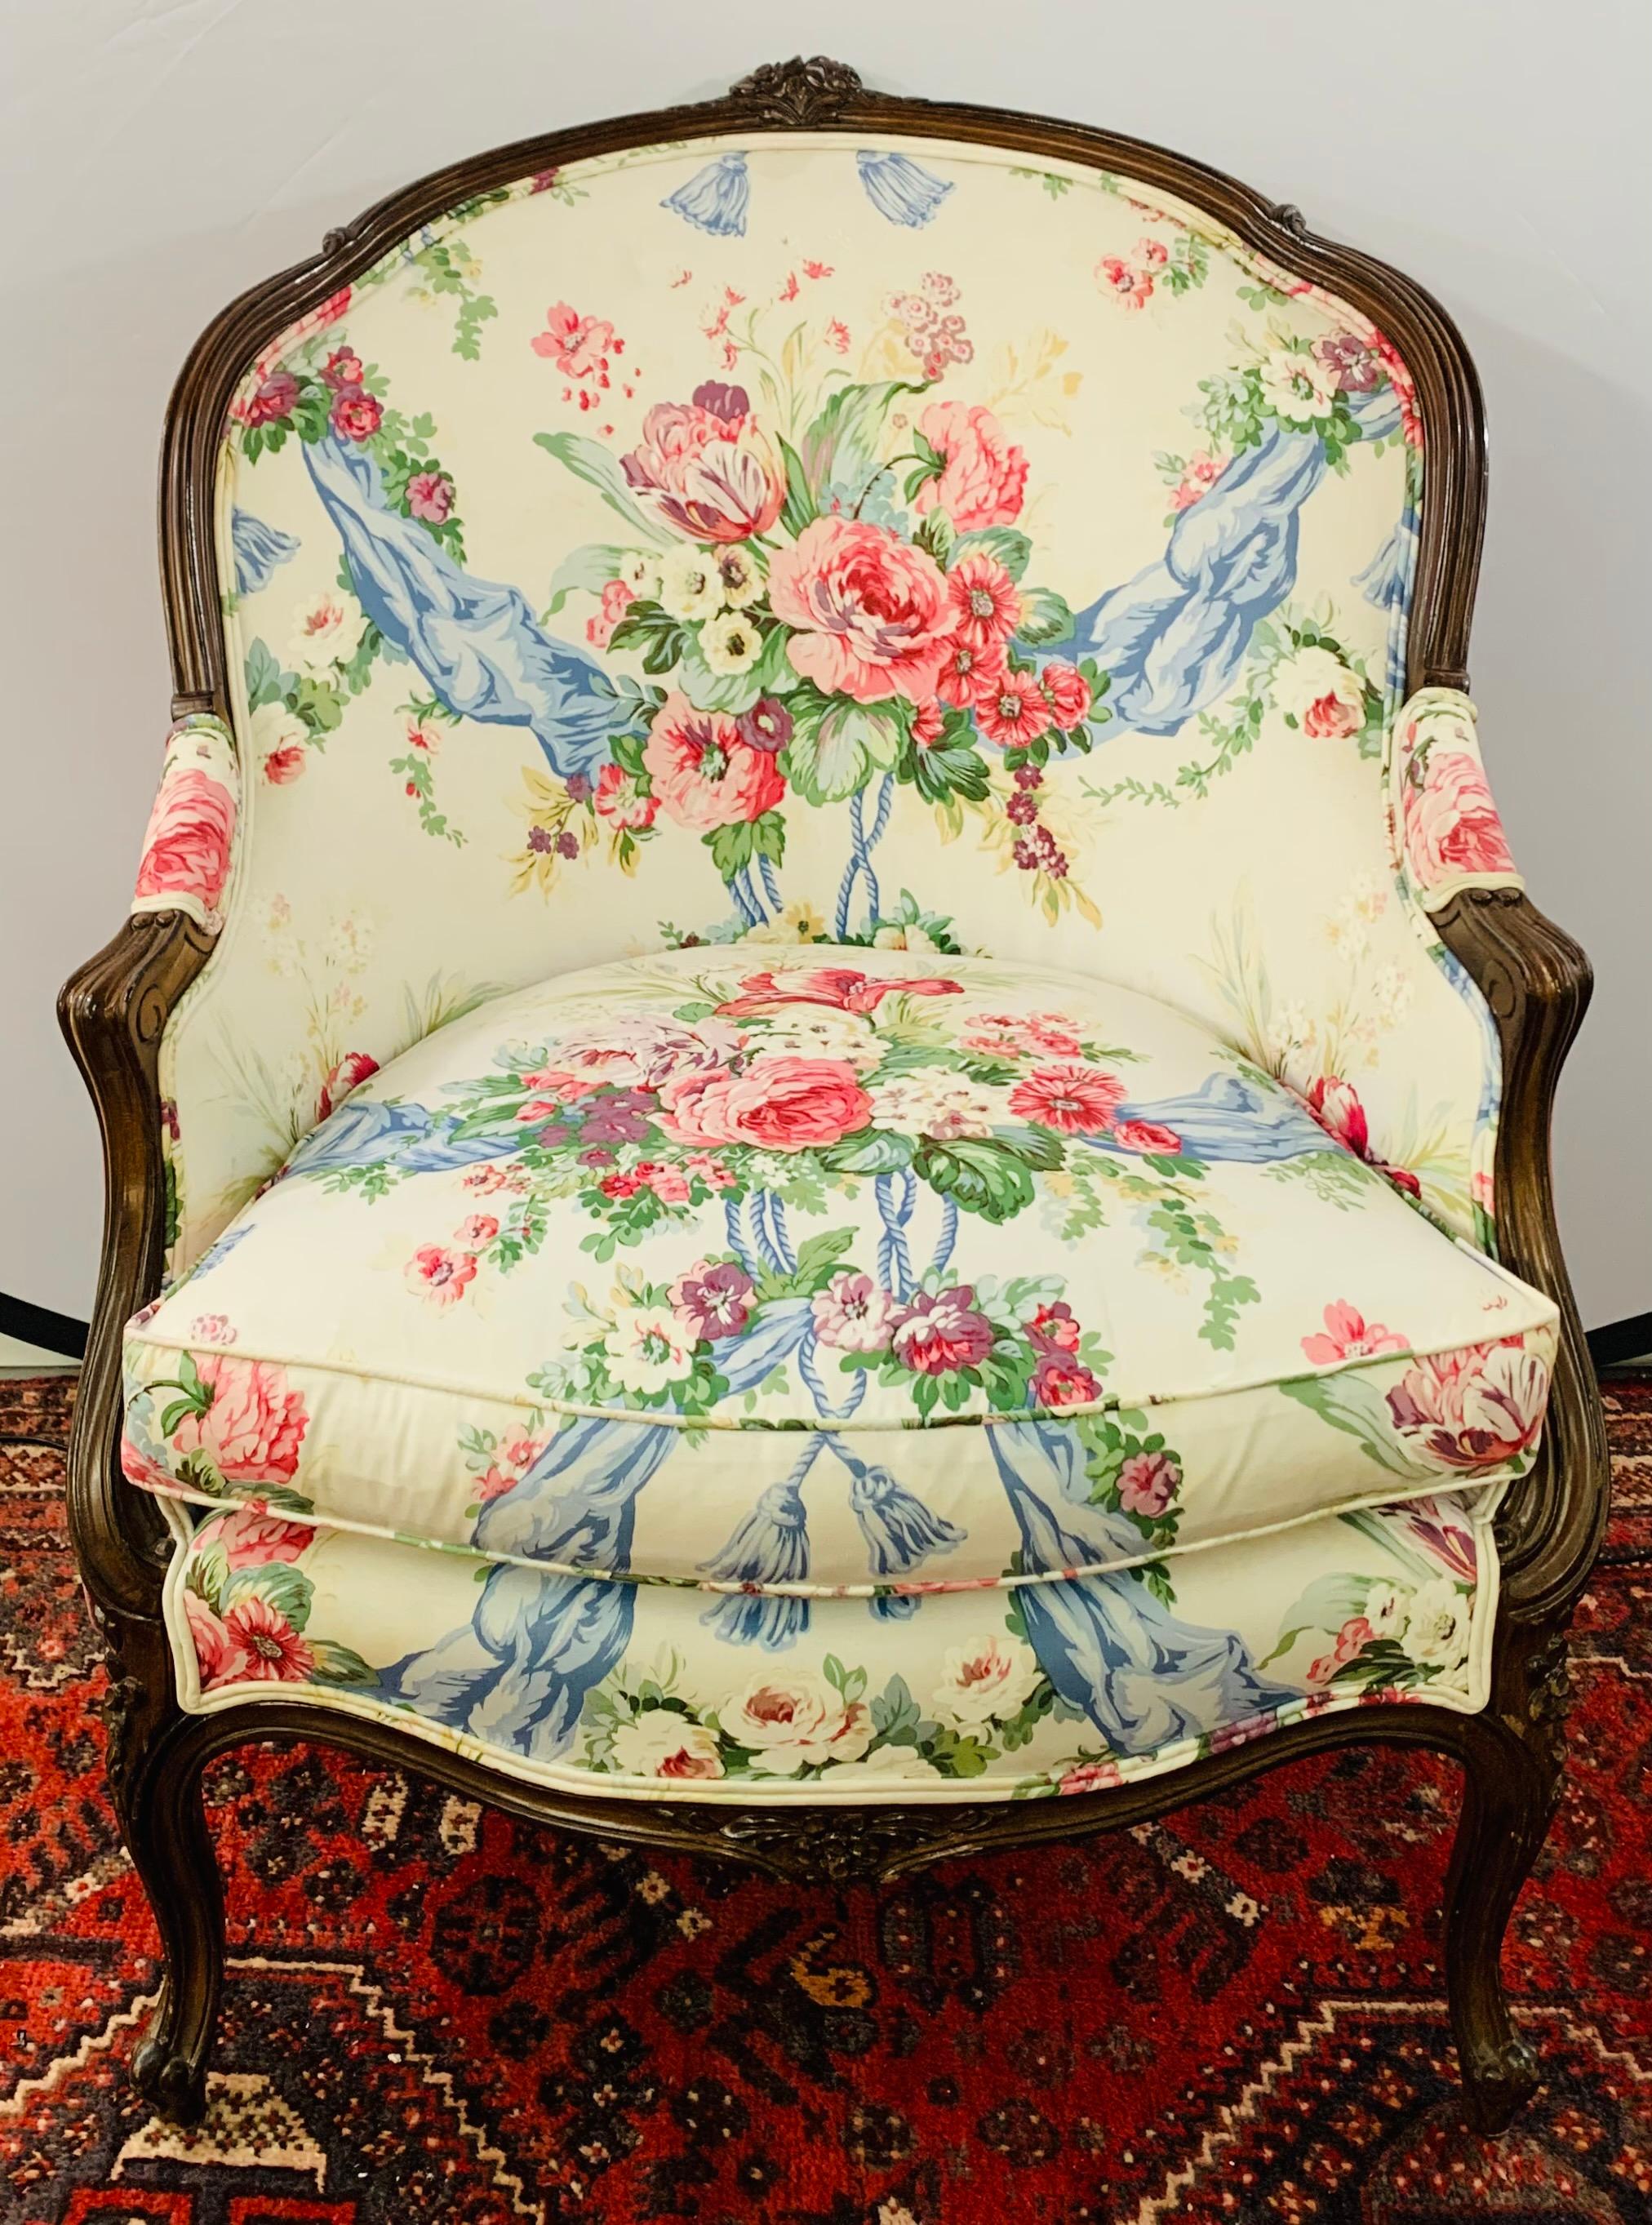 An exquisite pair of late 19th century Louis XV French bergère chairs. The frame of each chair is hand carved and present and decorated with flowers and scrolled acanthus leaves motifs. The legs are in a cabriole shape.
The flower patten patten